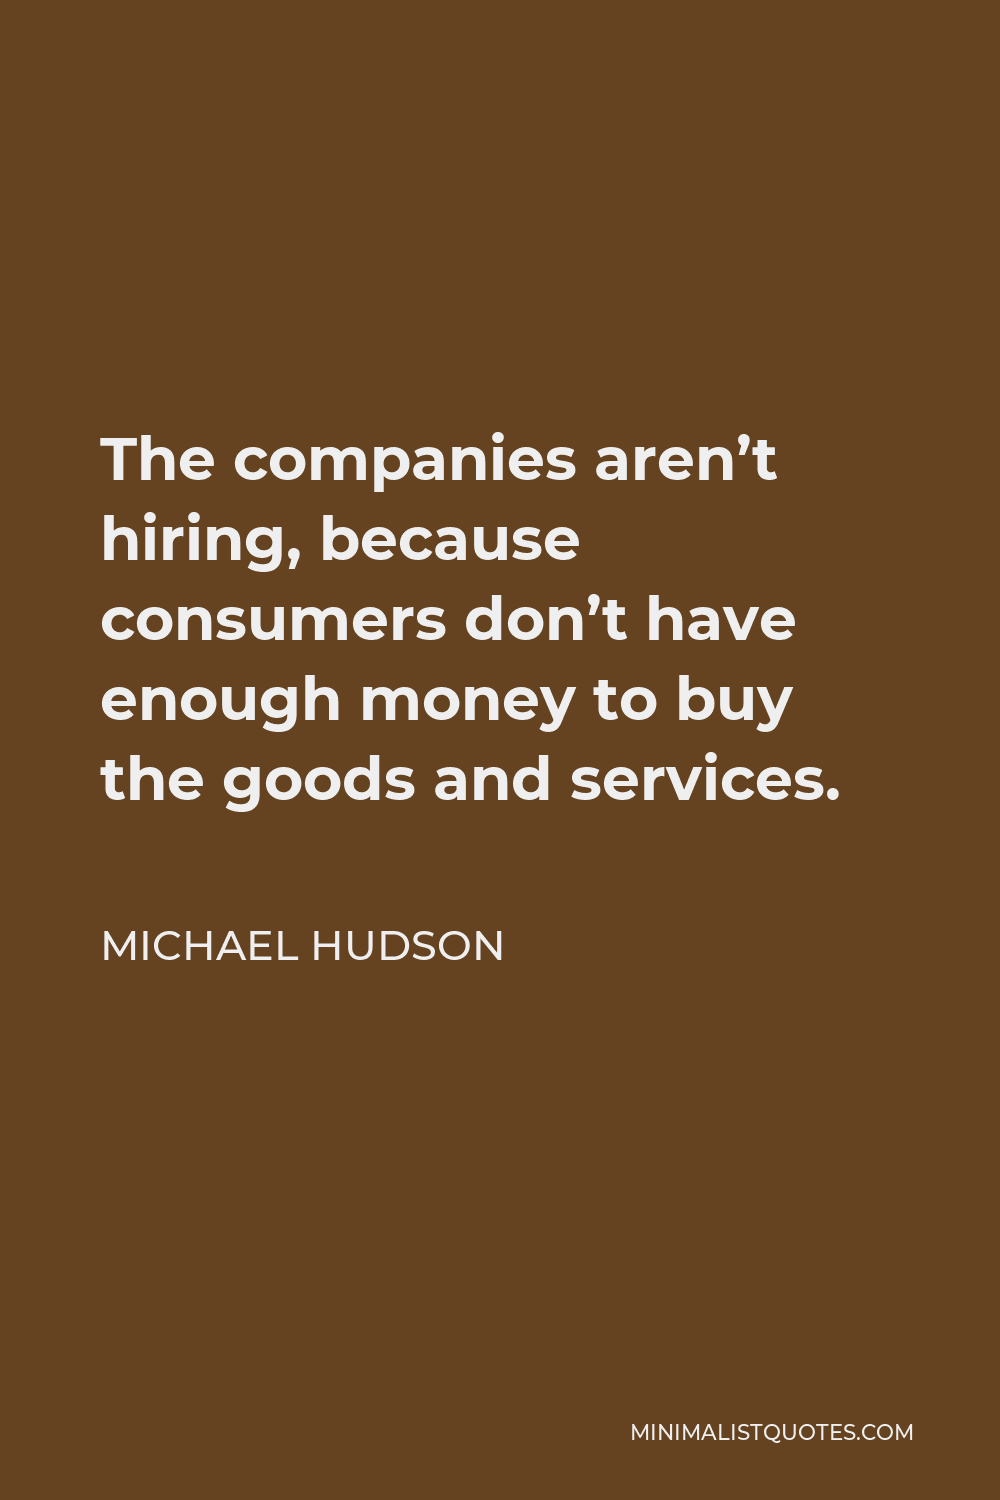 Michael Hudson Quote - The companies aren’t hiring, because consumers don’t have enough money to buy the goods and services.